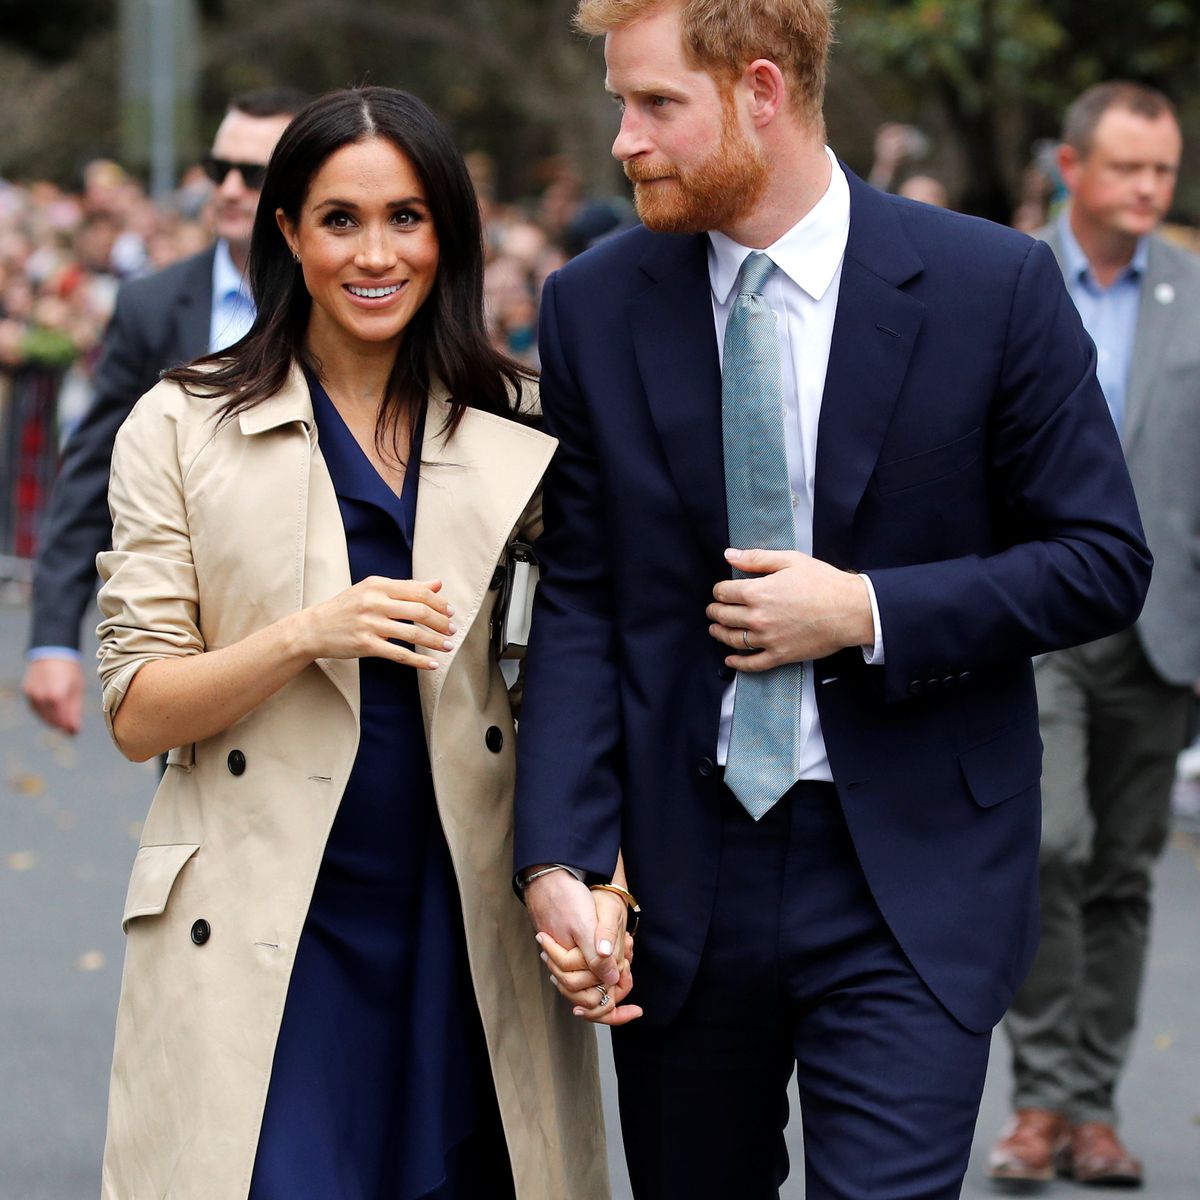 melbourne, australia   october 18 prince harry, duke of sussex and meghan, duchess of sussex wave to the crowd as they arrive at the royal botanic gardens on october 18, 2018 in melbourne, australia the duke and duchess of sussex are on their official 16 day autumn tour visiting cities in australia, fiji, tonga and new zealand photo by phil noble   poolgetty images